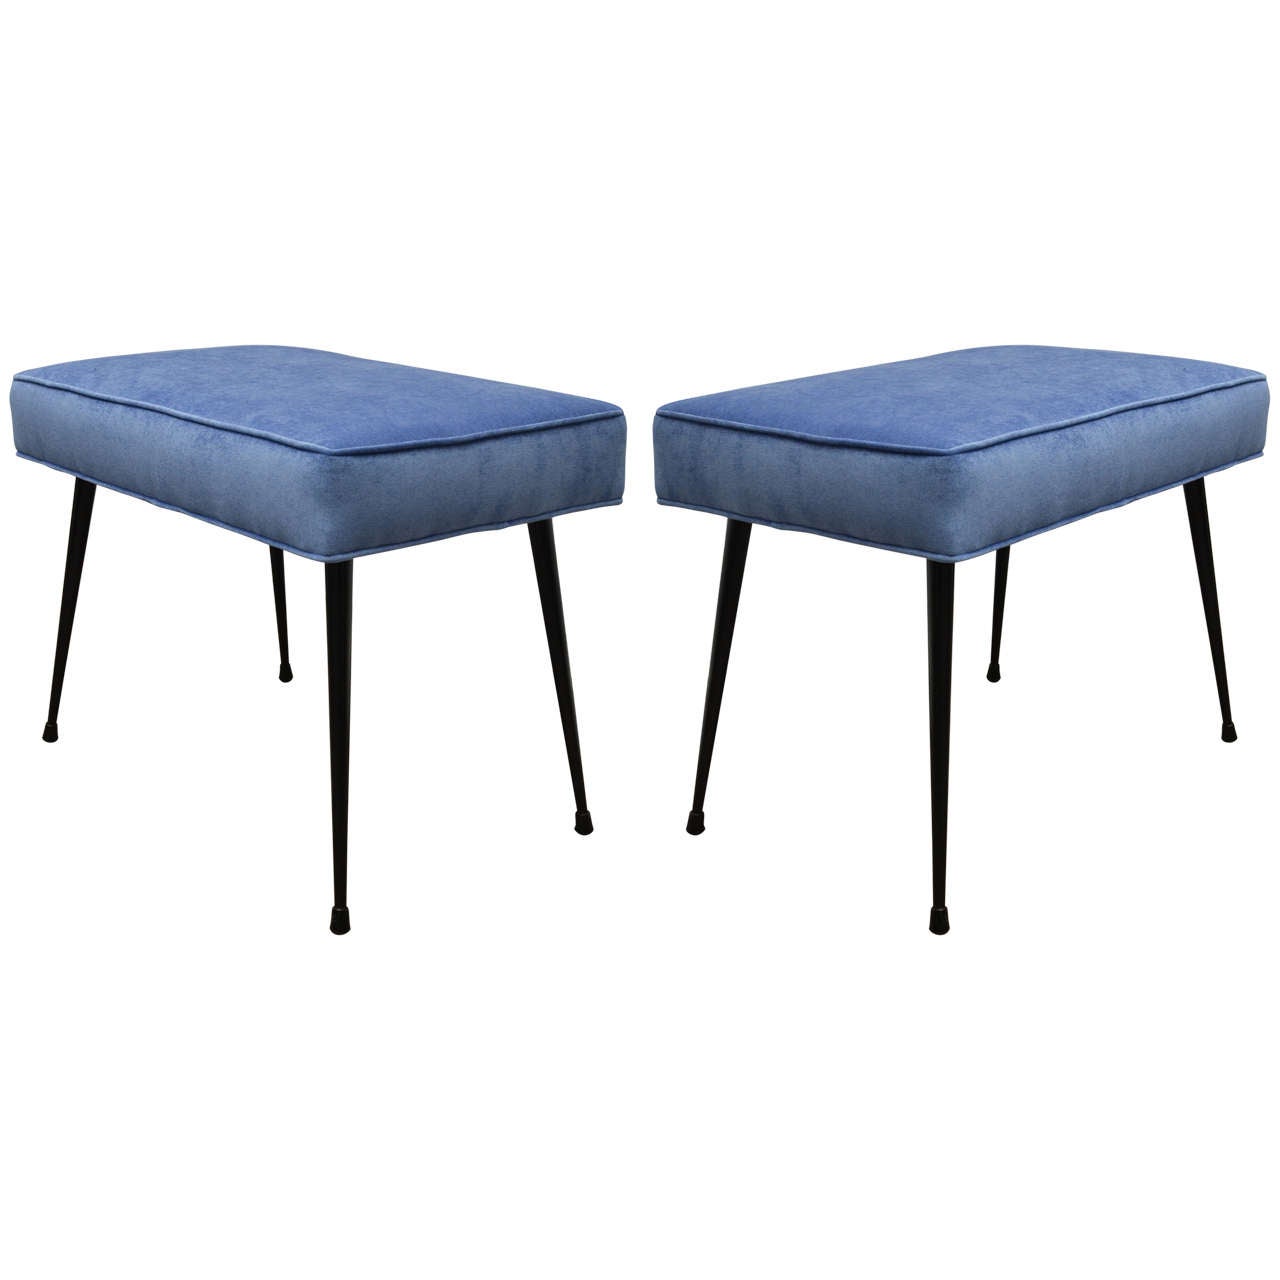 Pair of Blue Upholstered Benches